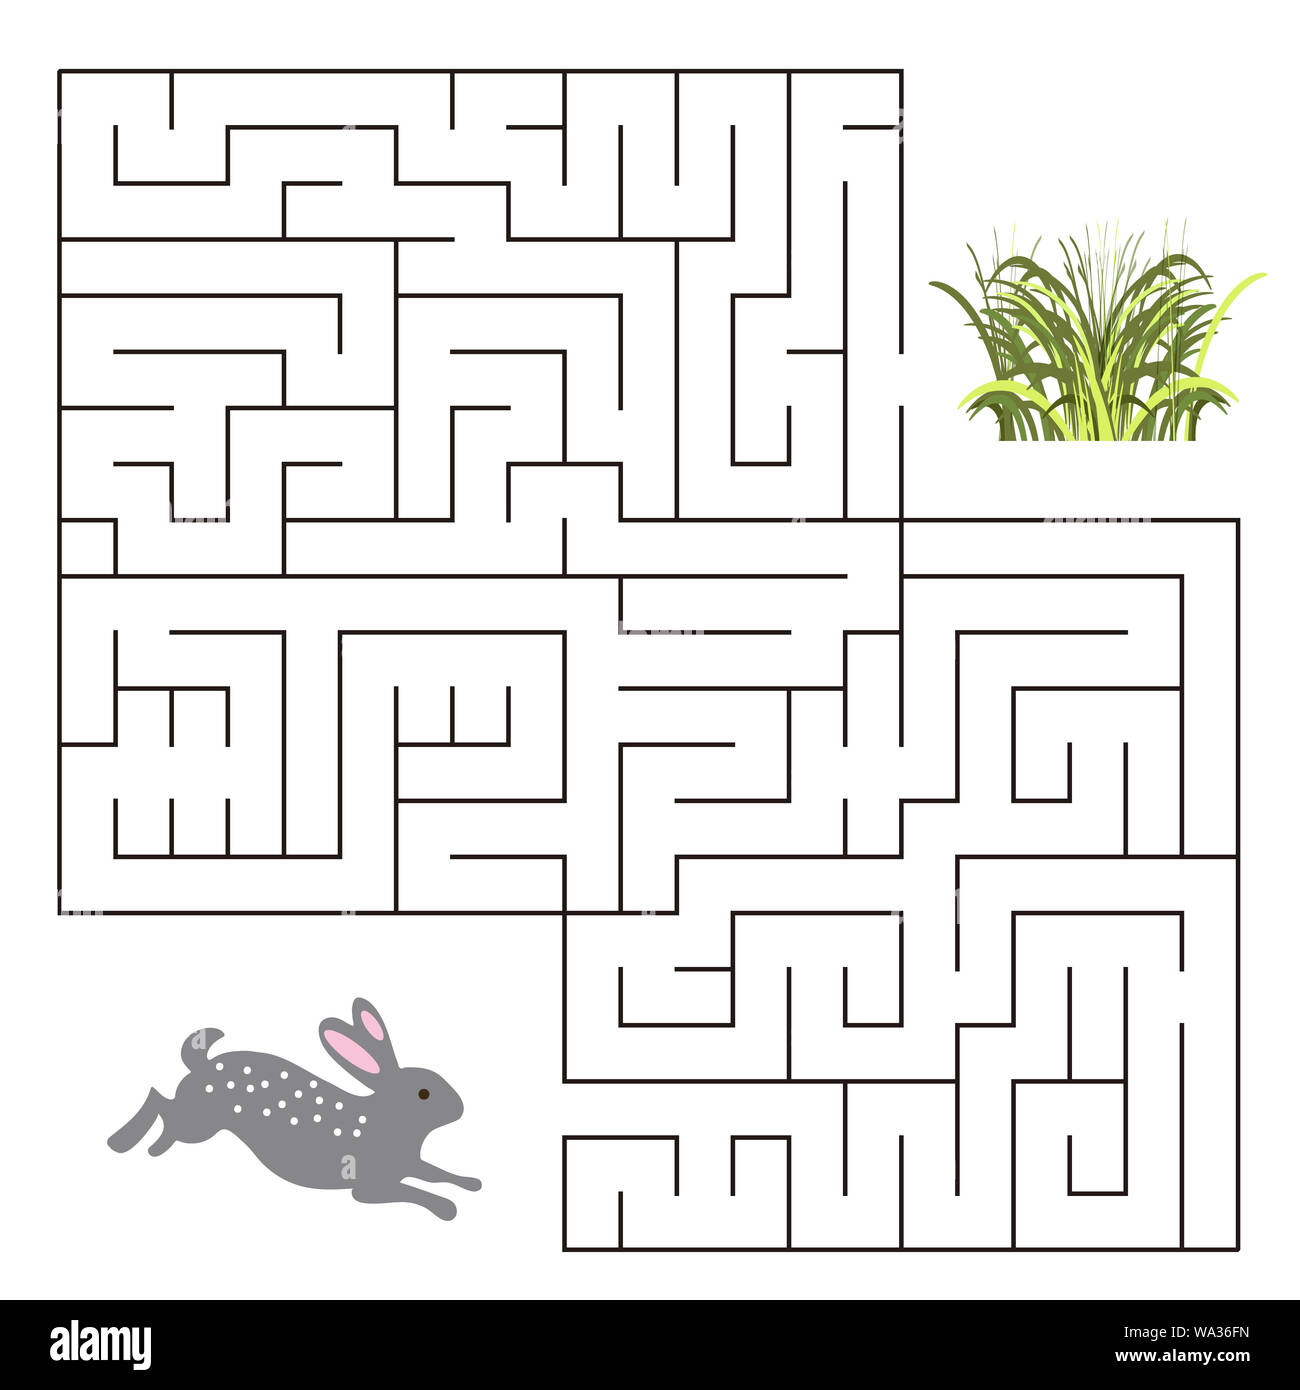 https://c8.alamy.com/comp/WA36FN/maze-game-for-kidsfind-right-way-isolated-simple-square-maze-on-white-background-template-page-with-game-WA36FN.jpg